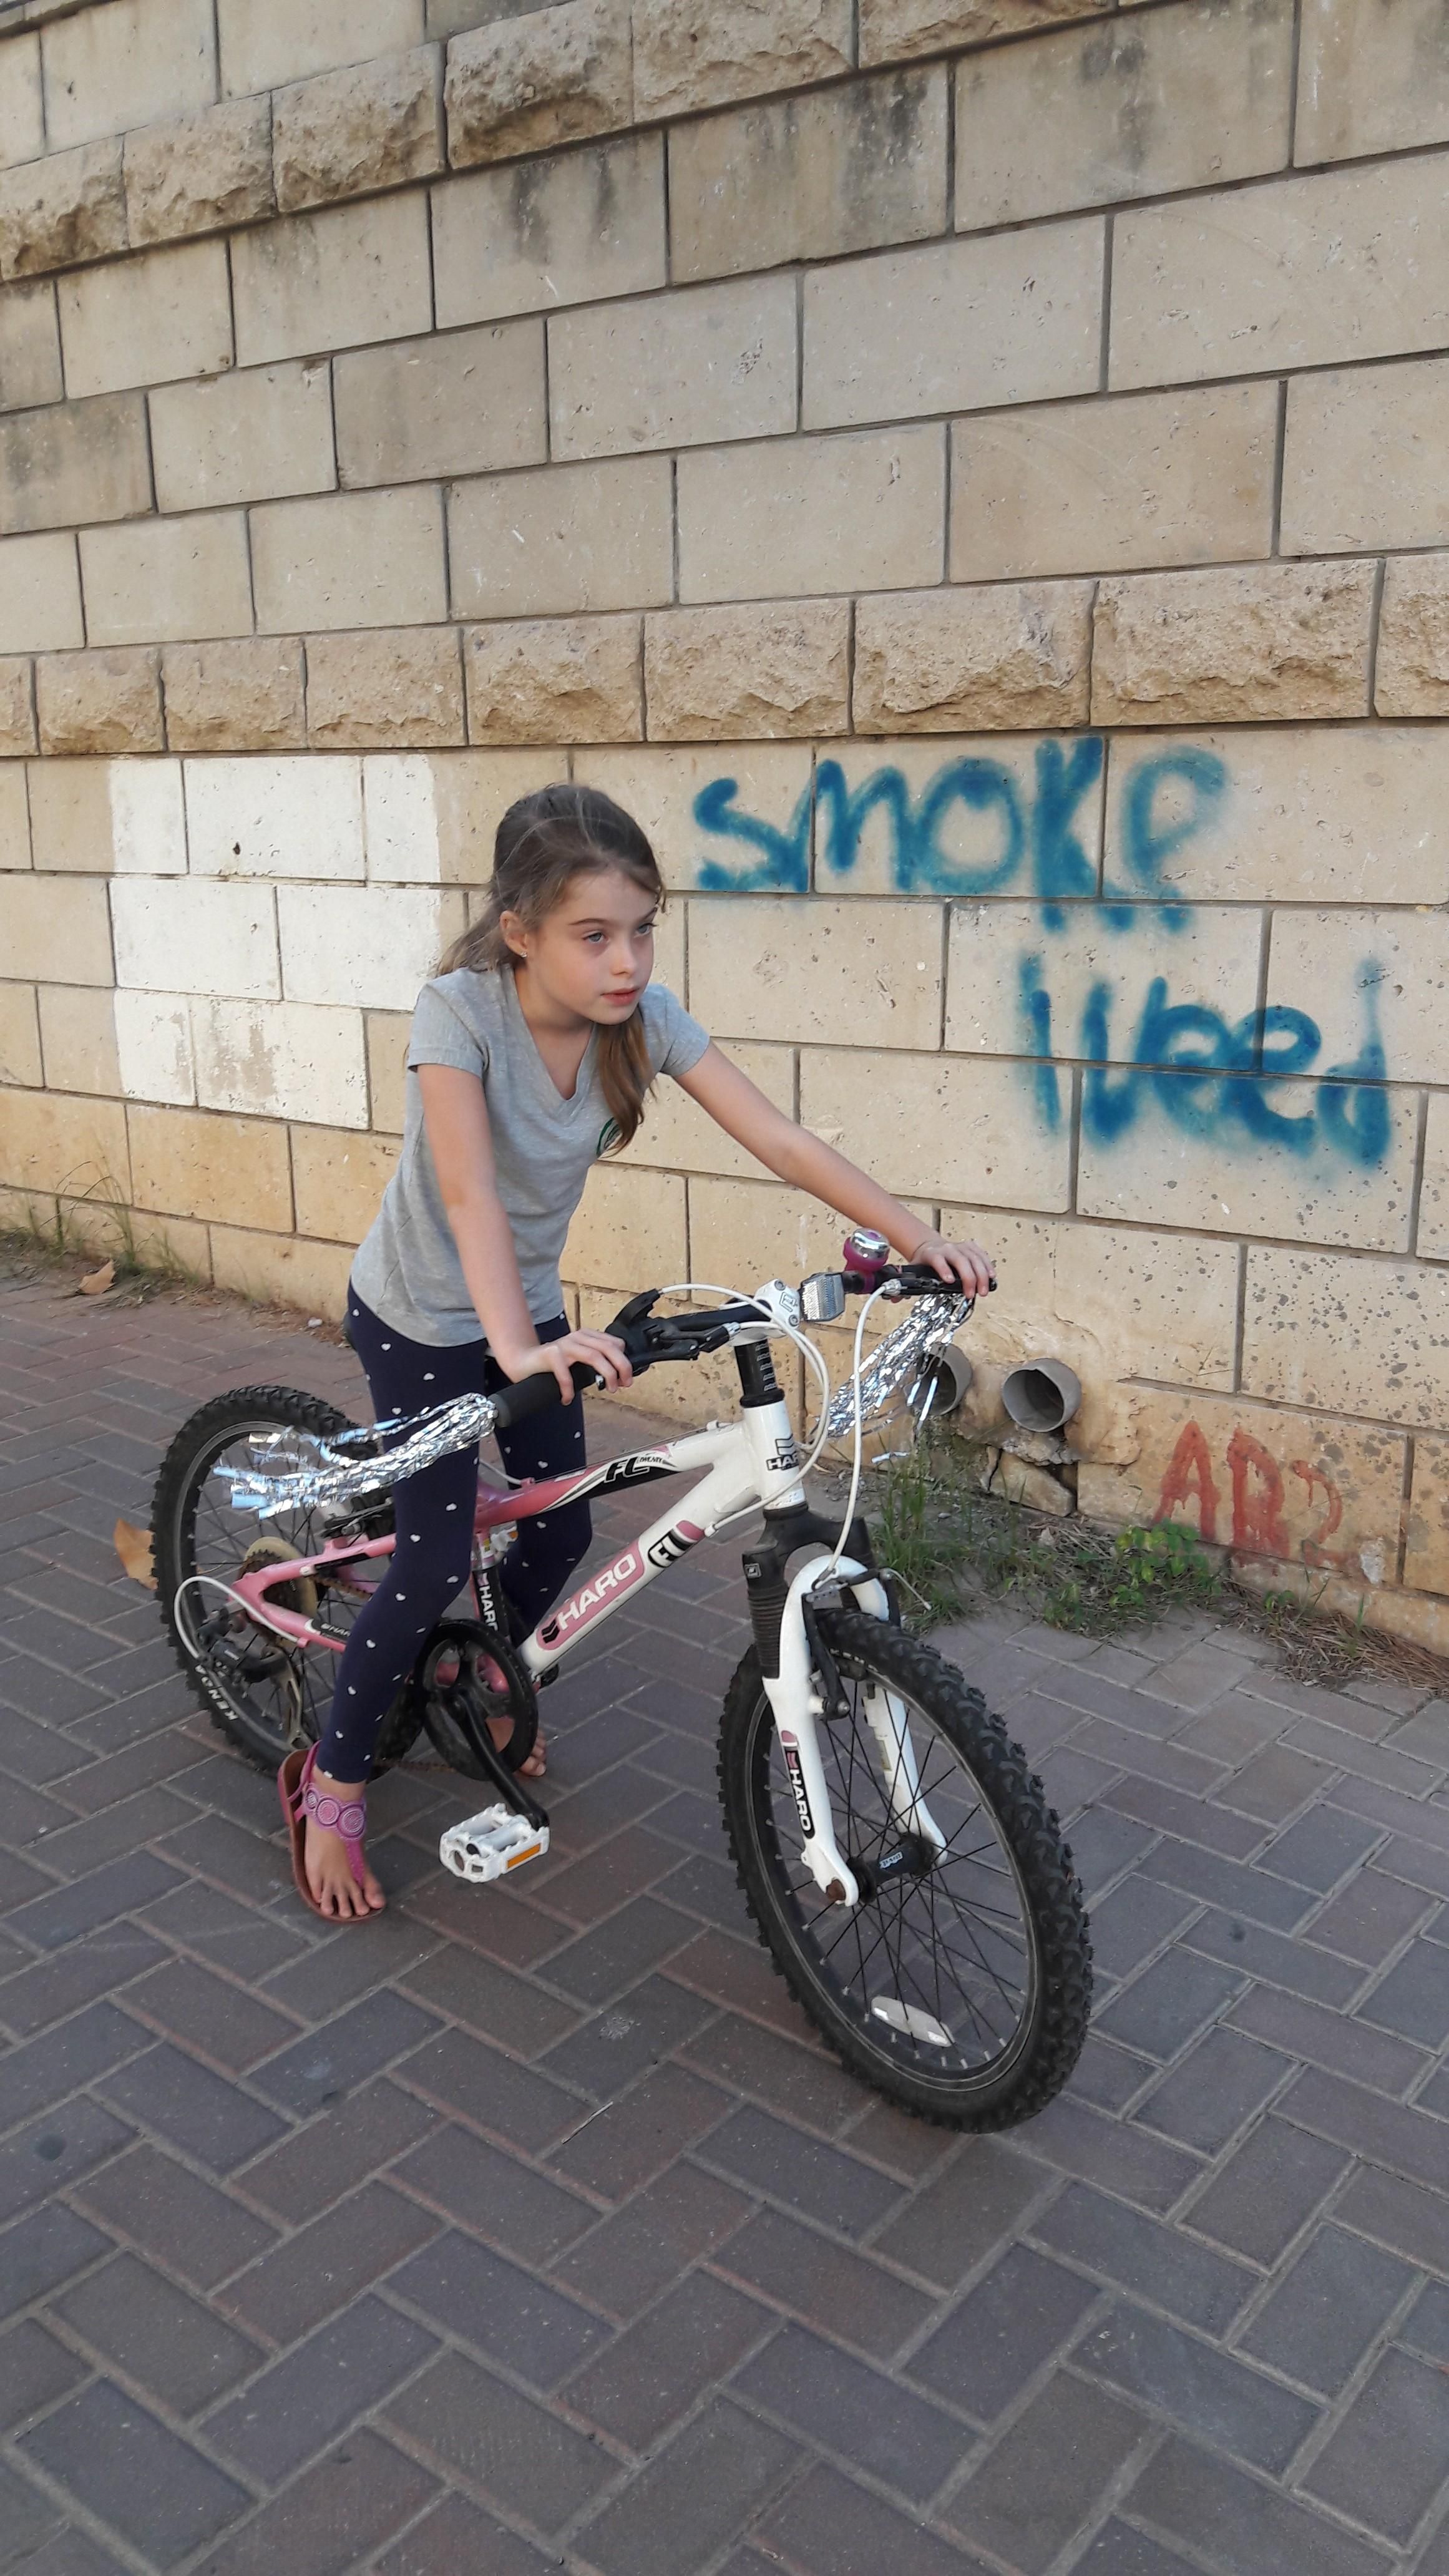 Took a pic of my kid on her new pimped up bike .....didn't pay attention to the graffiti in the background.